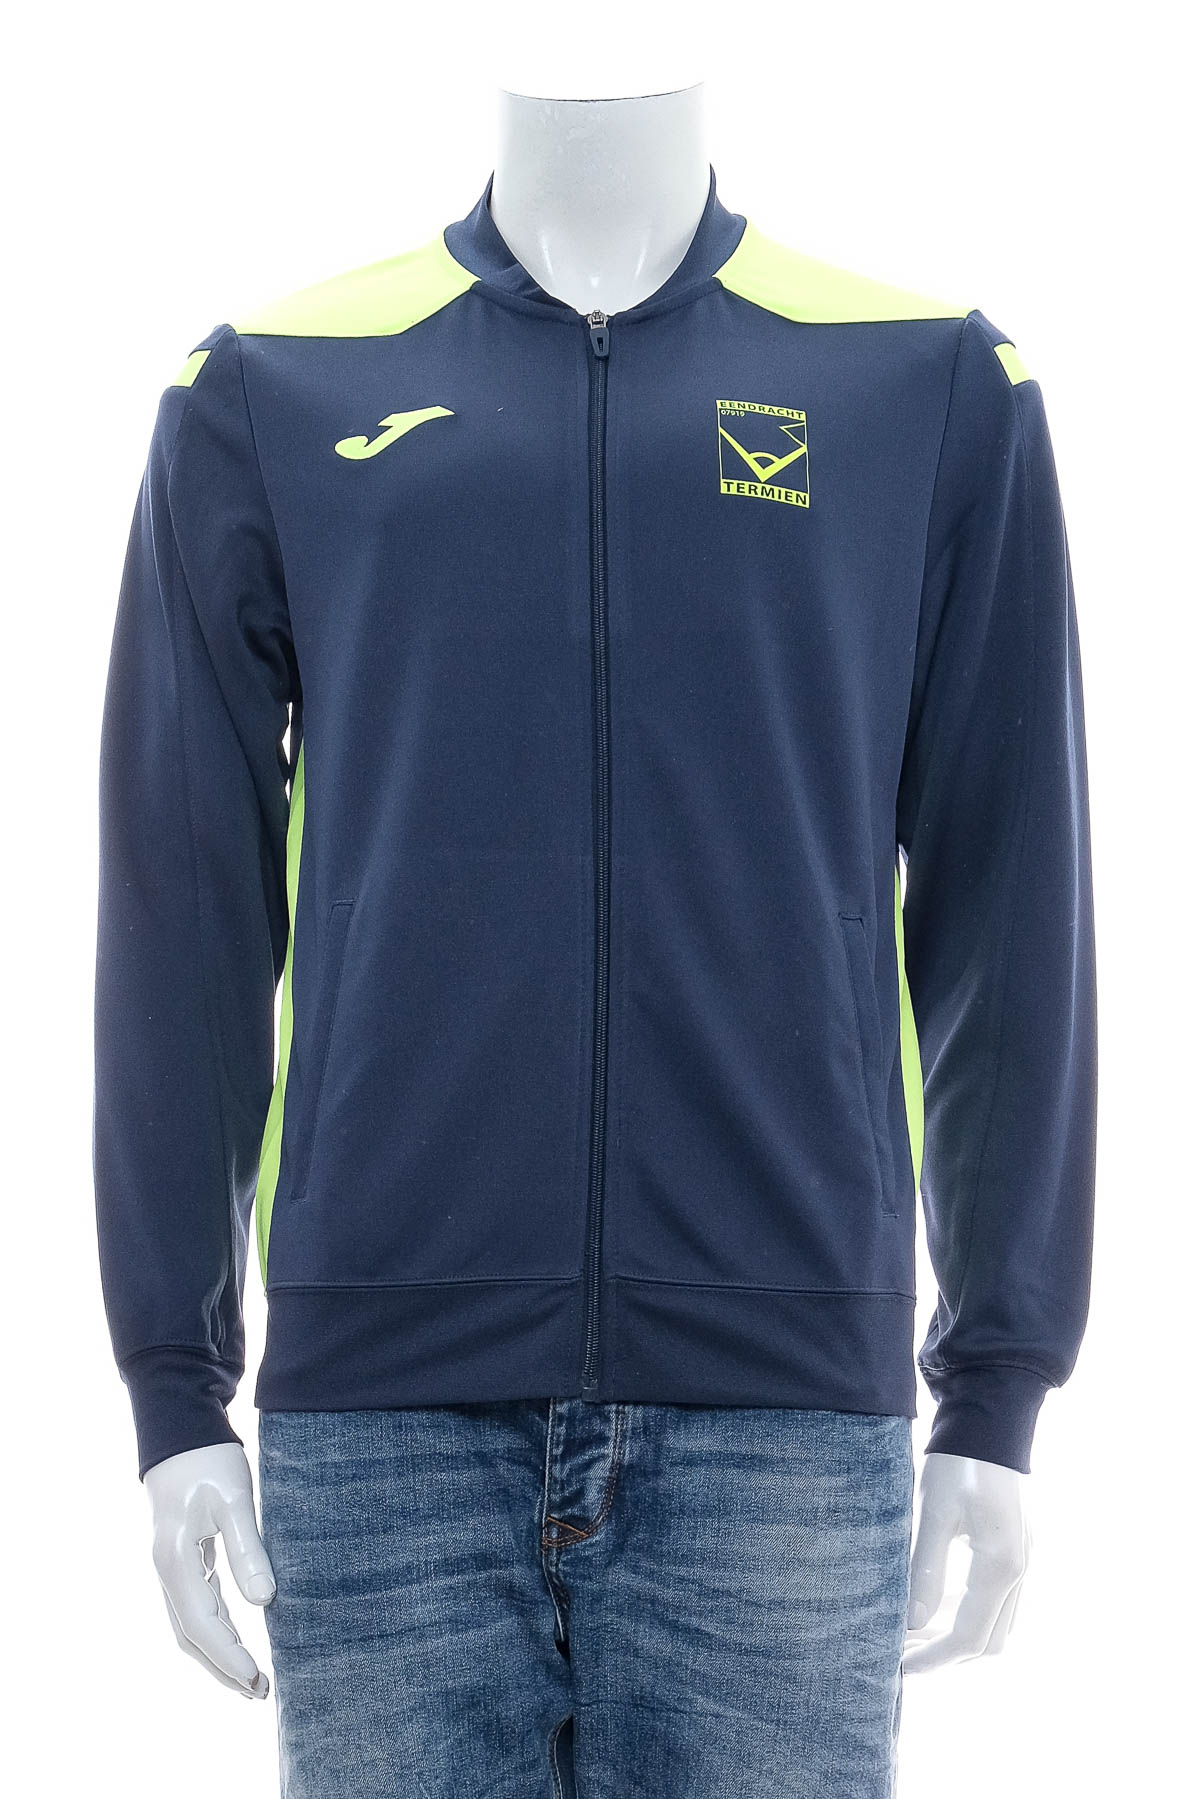 Male sports top - Joma - 0